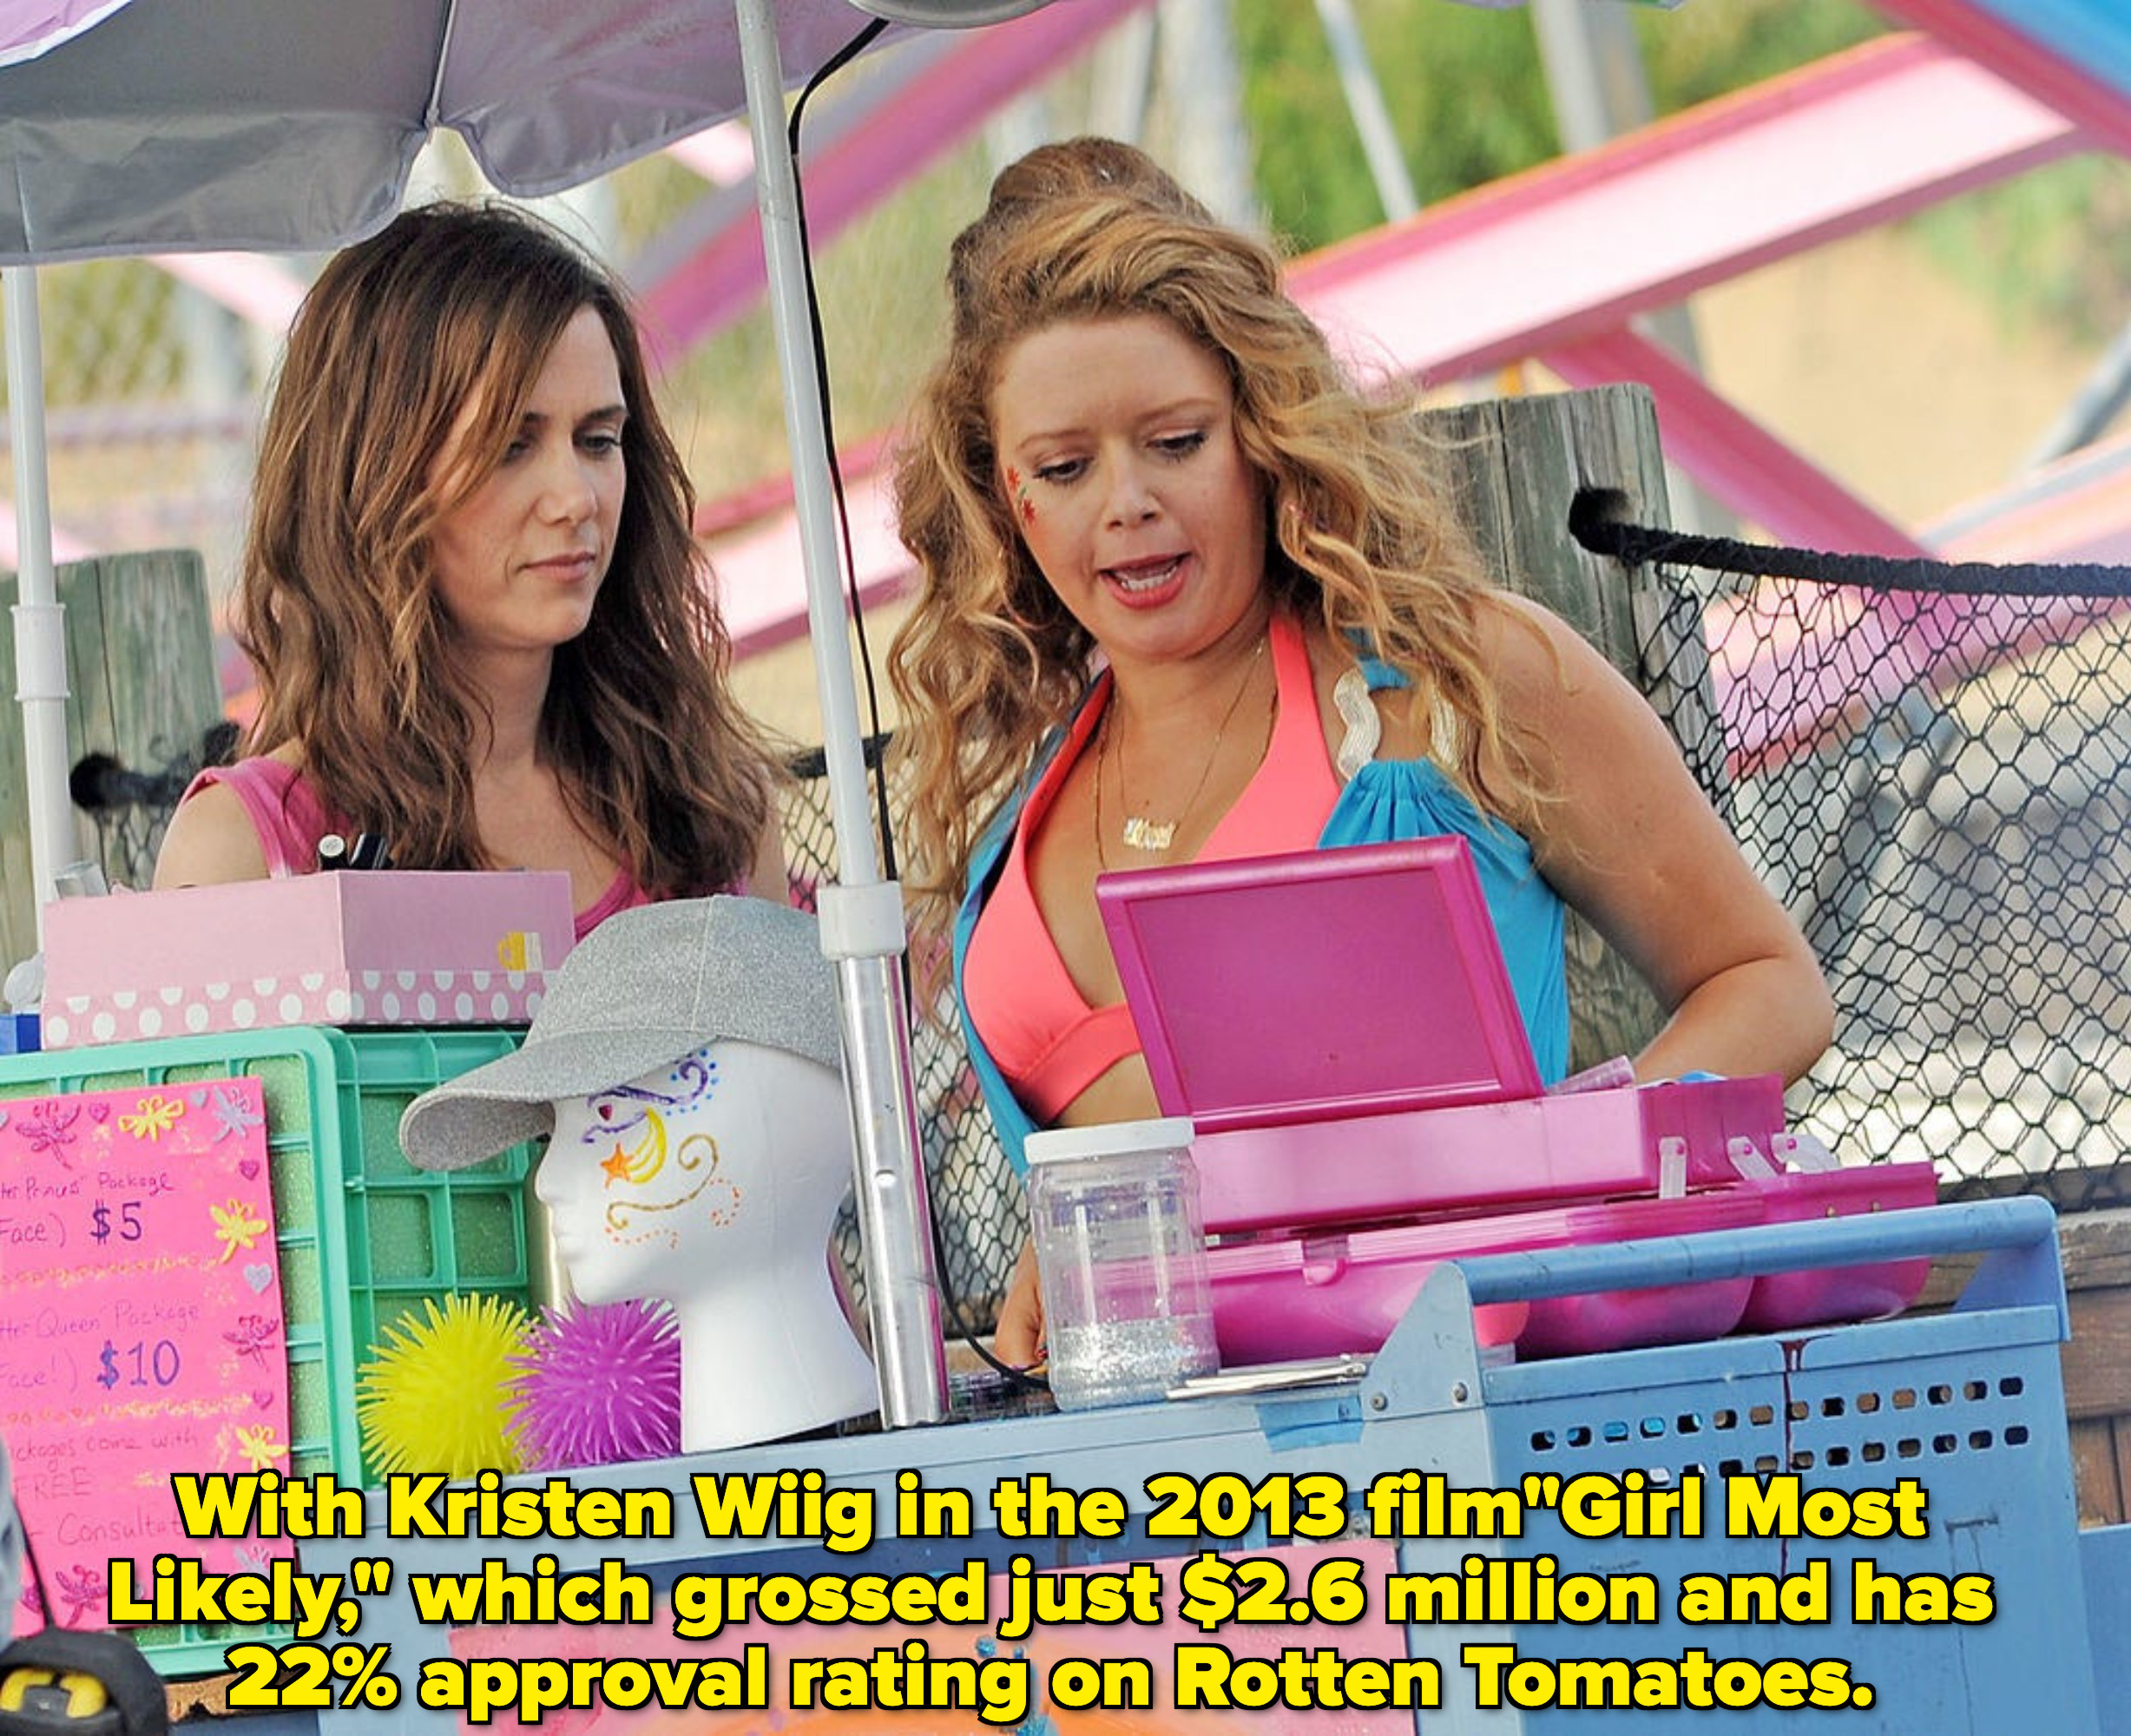 Lyonne and Kristen Wiig at a seller&#x27;s stand talking